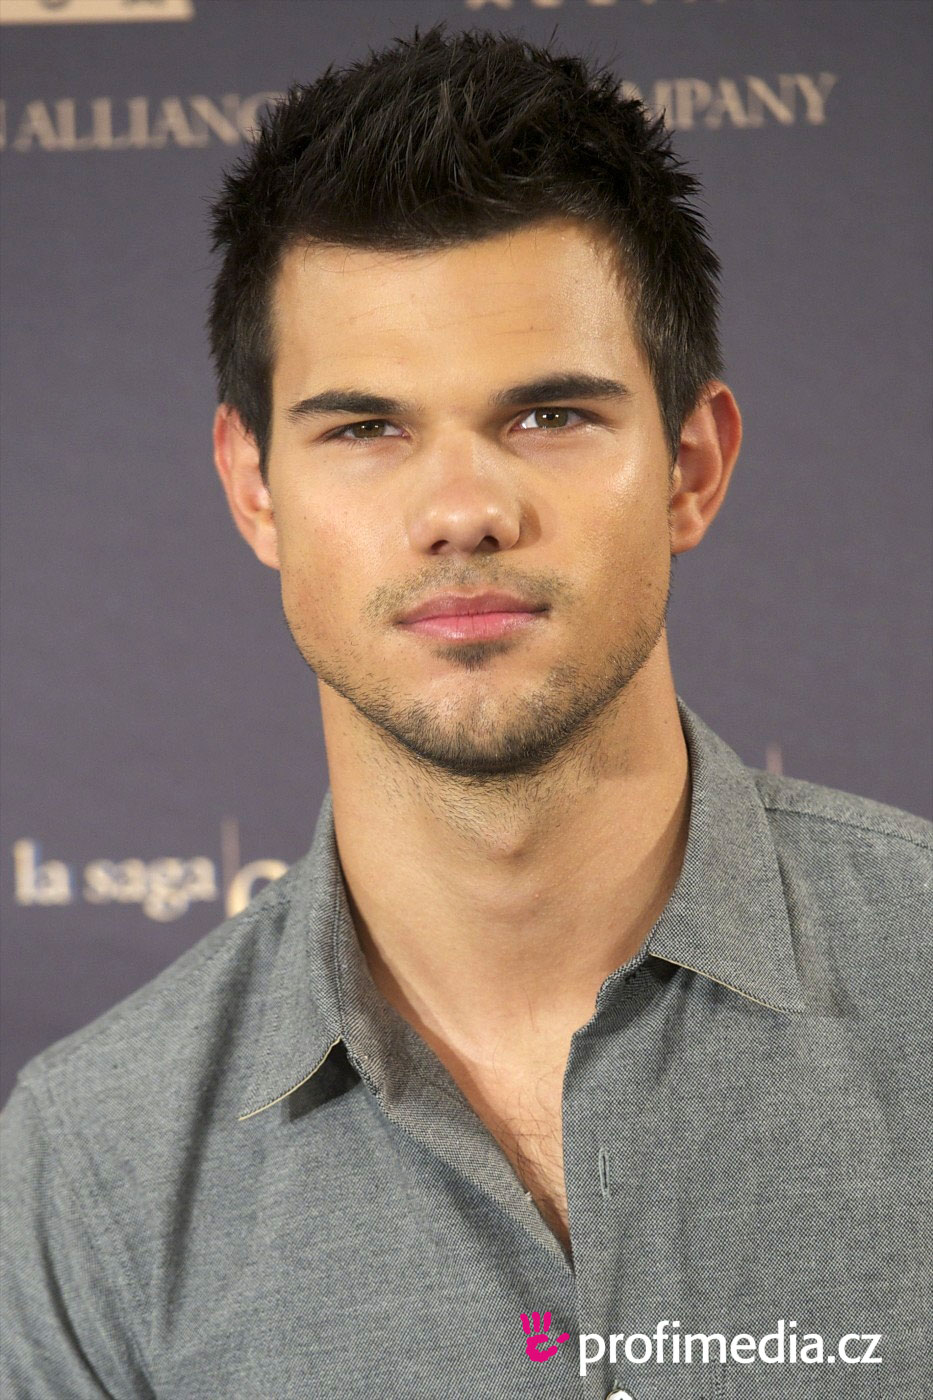 Prom hairstyle - Taylor Lautner - Taylor Lautner